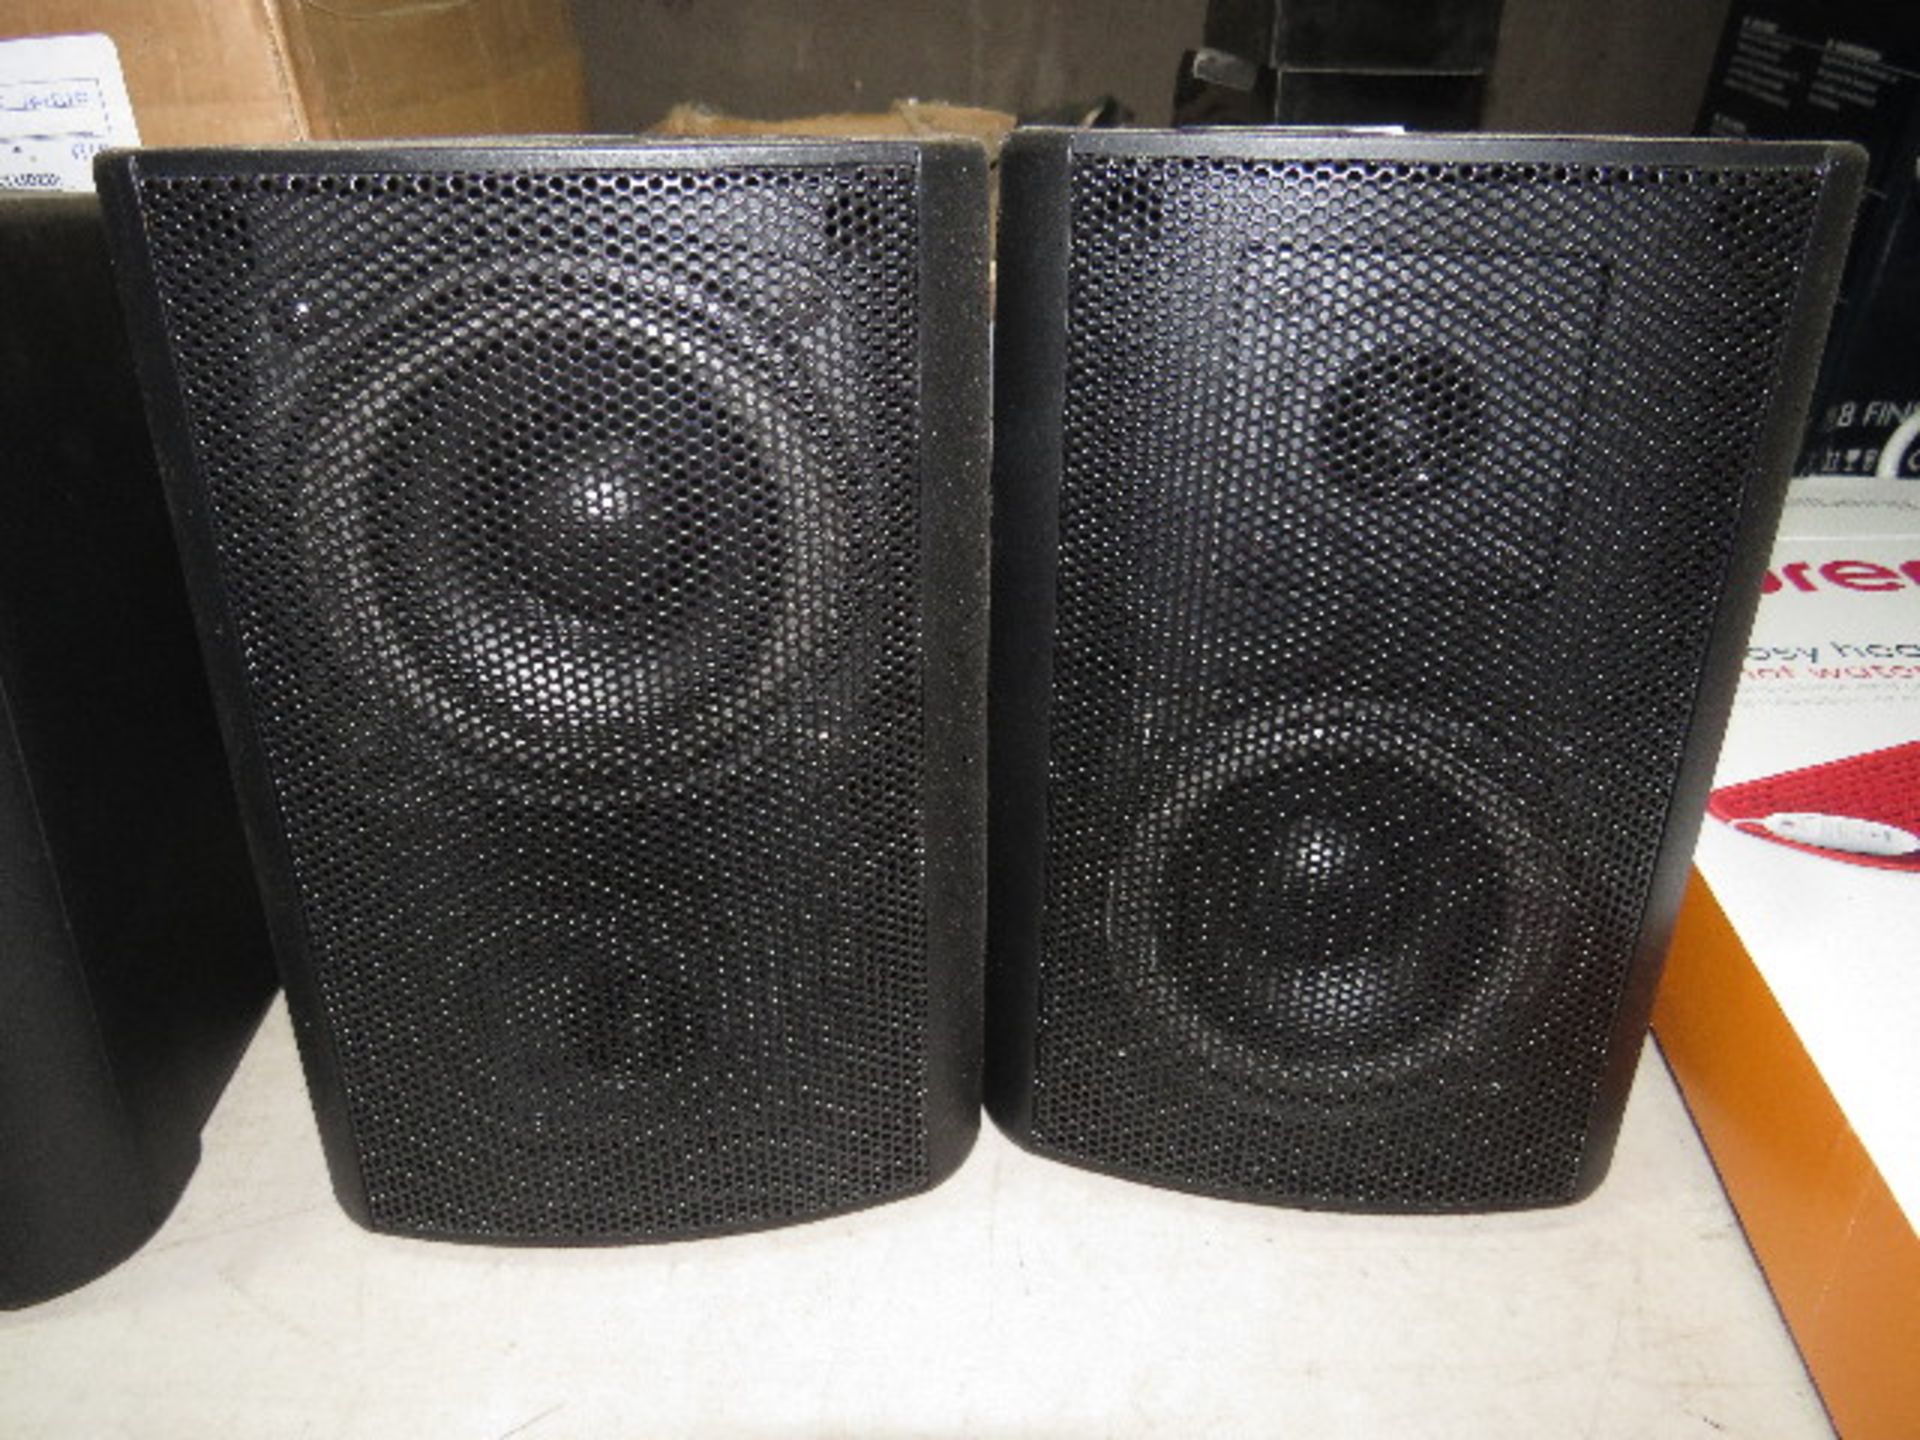 Cambridge Pro 1 Blk wall speakers, unchecked in non original box, missing wall brackets, PLU??